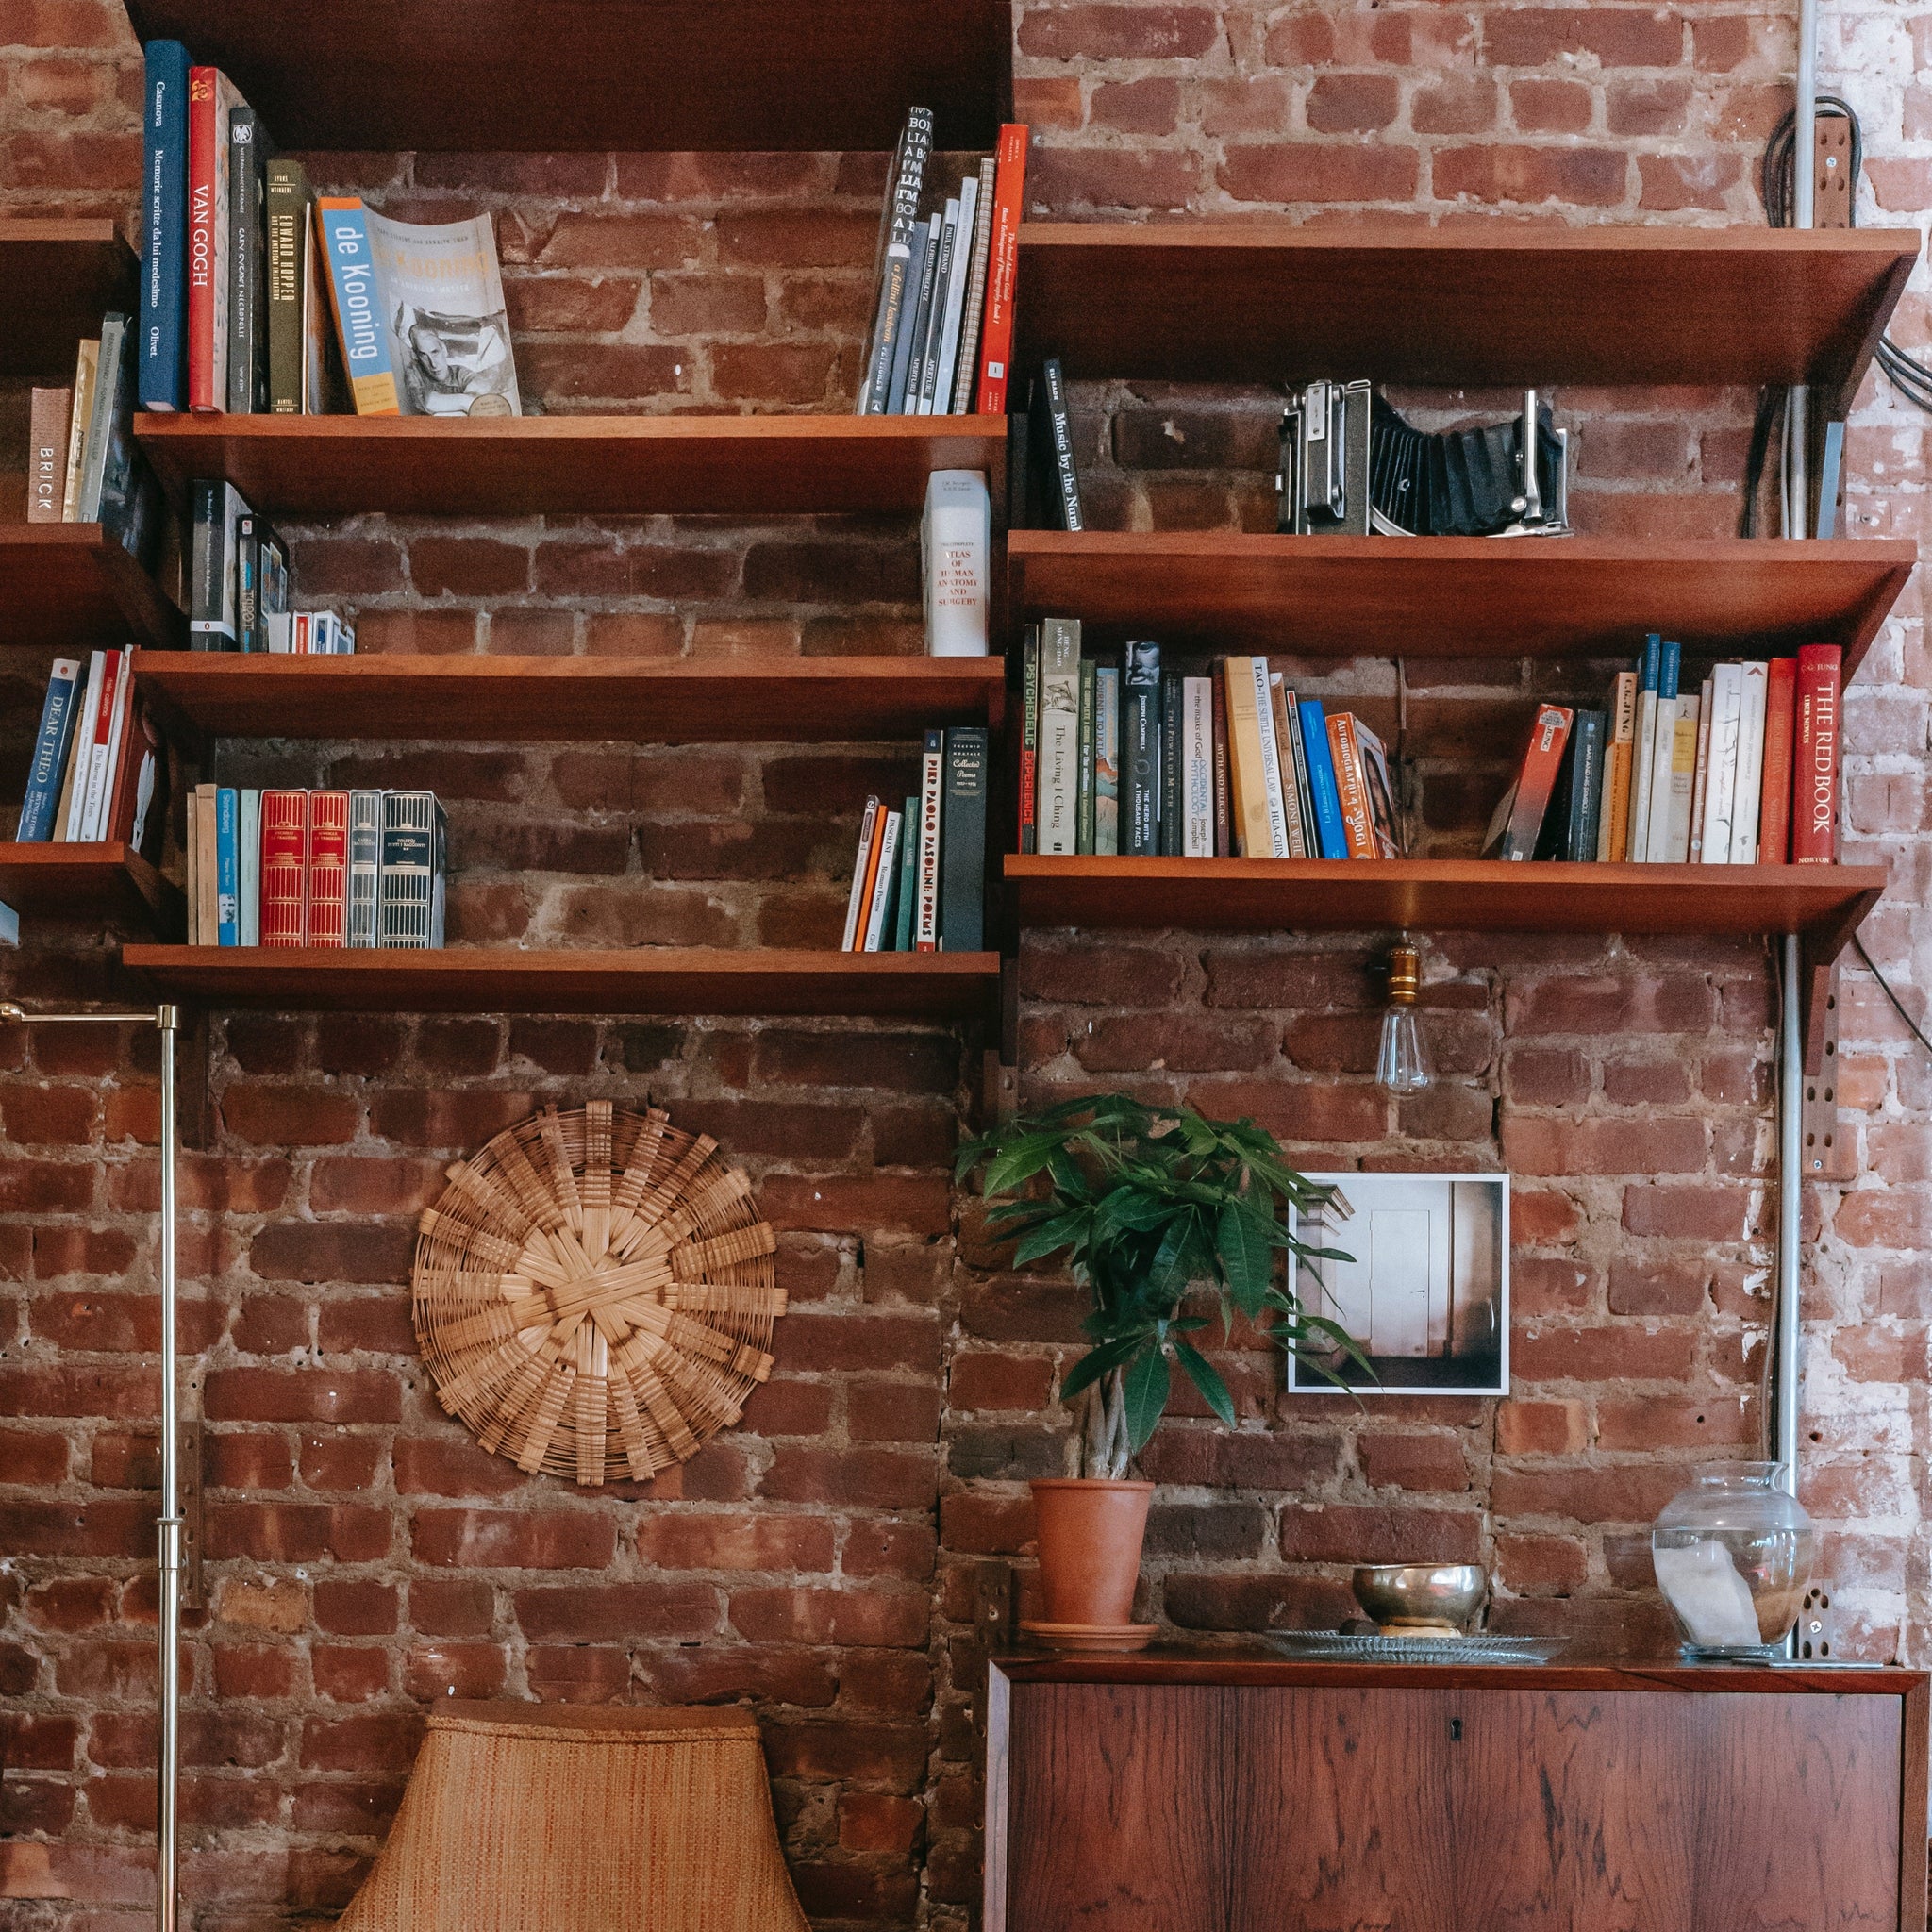 What is the significance of a floating bookshelf?